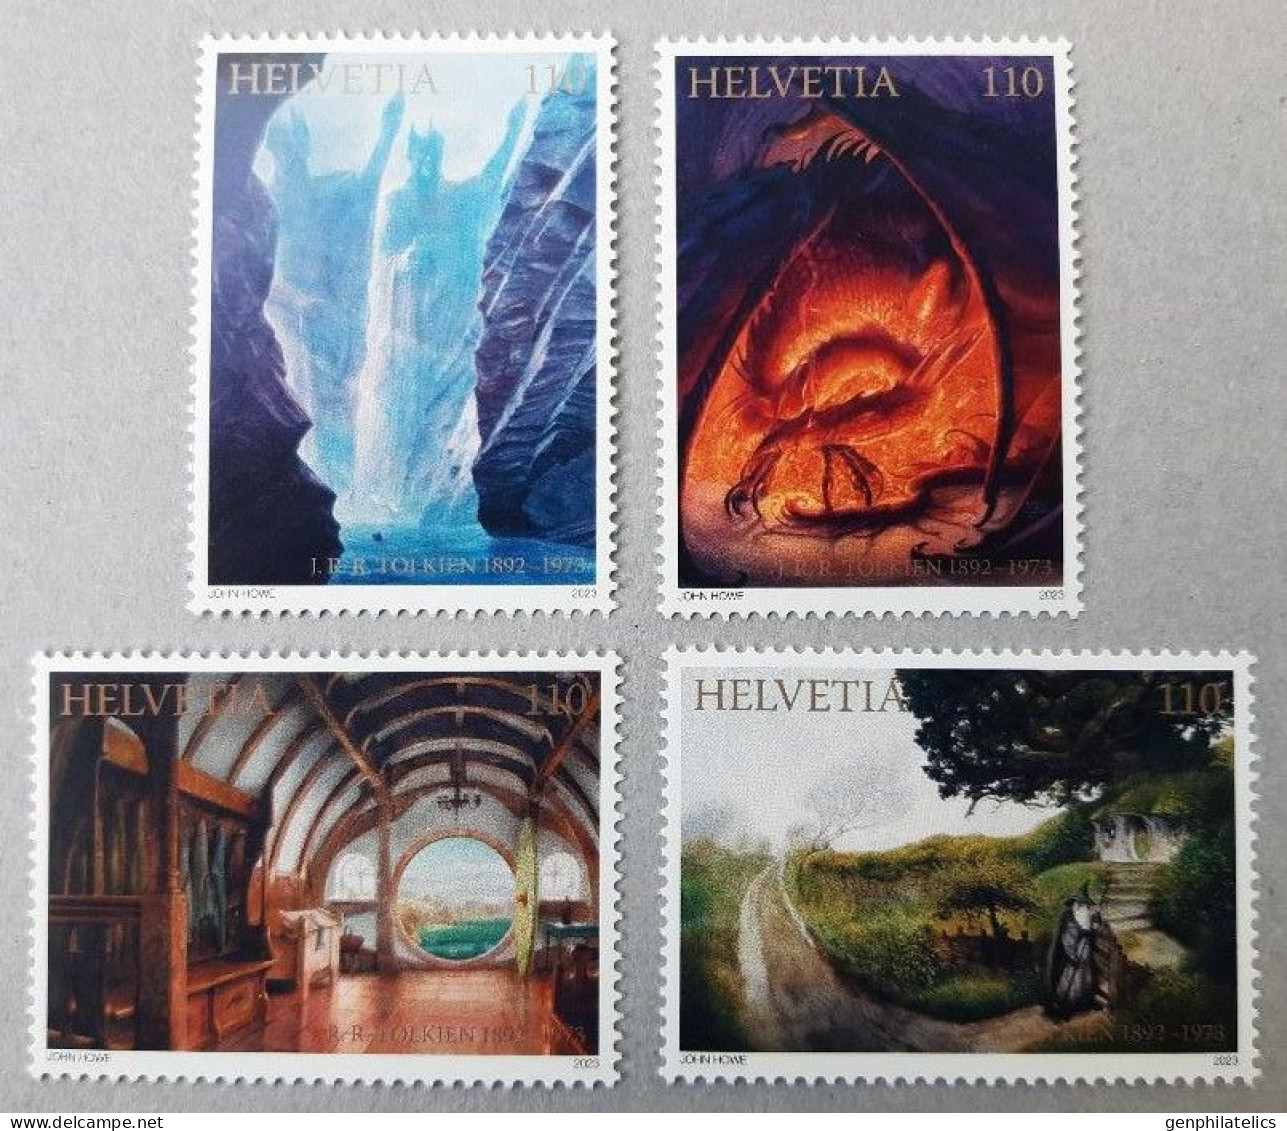 SWITZERLAND 2023 PEOPLE Famous Persons - J.R.R. TOLKIEN - Fine Set (self-adhesive) MNH - Nuevos